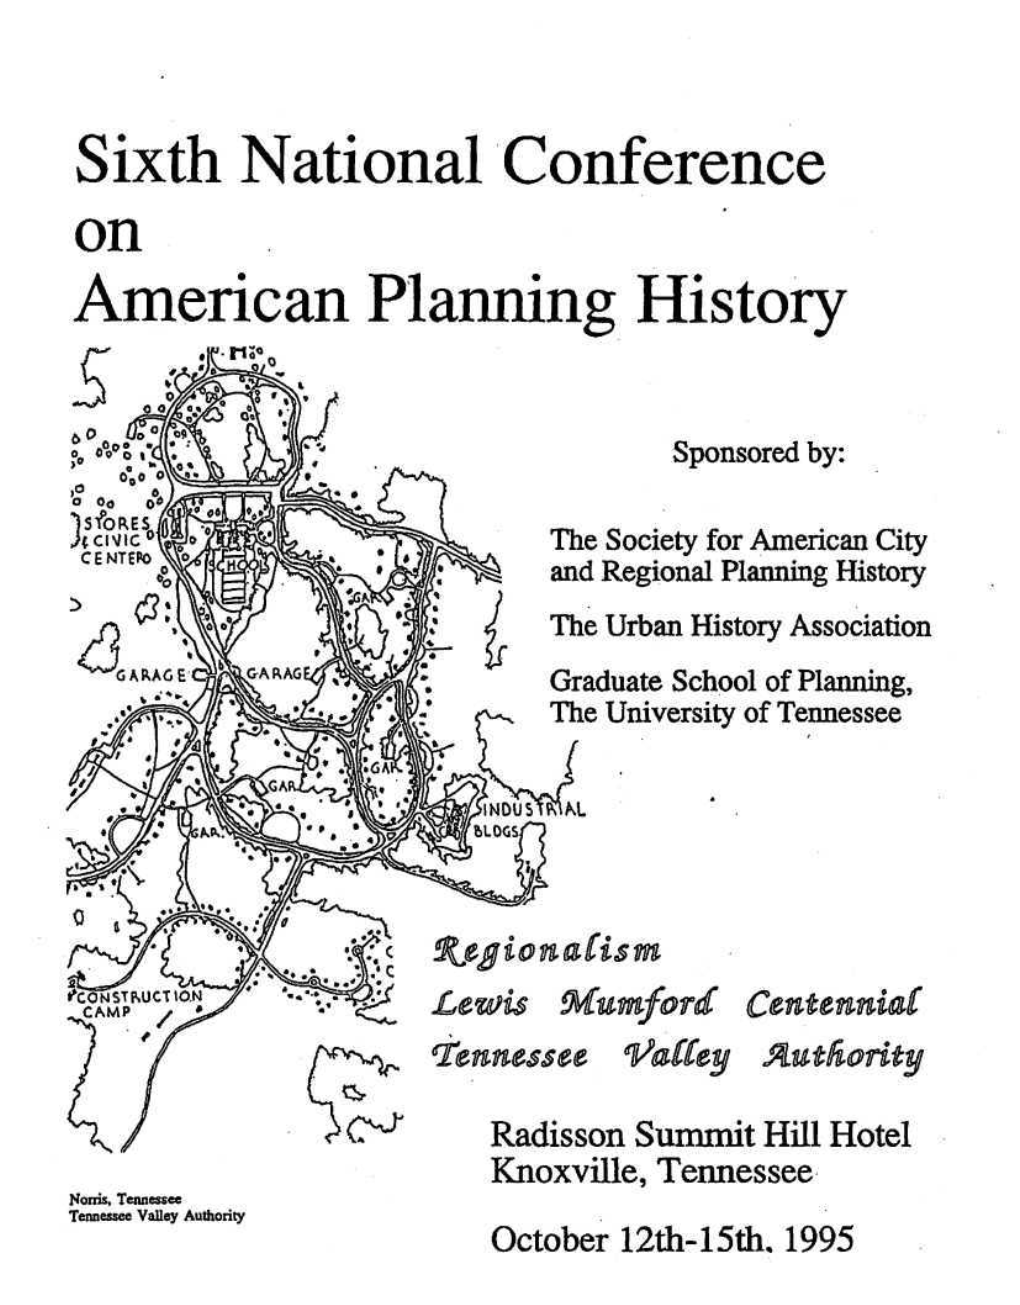 Sixth National Conference on American Planning History